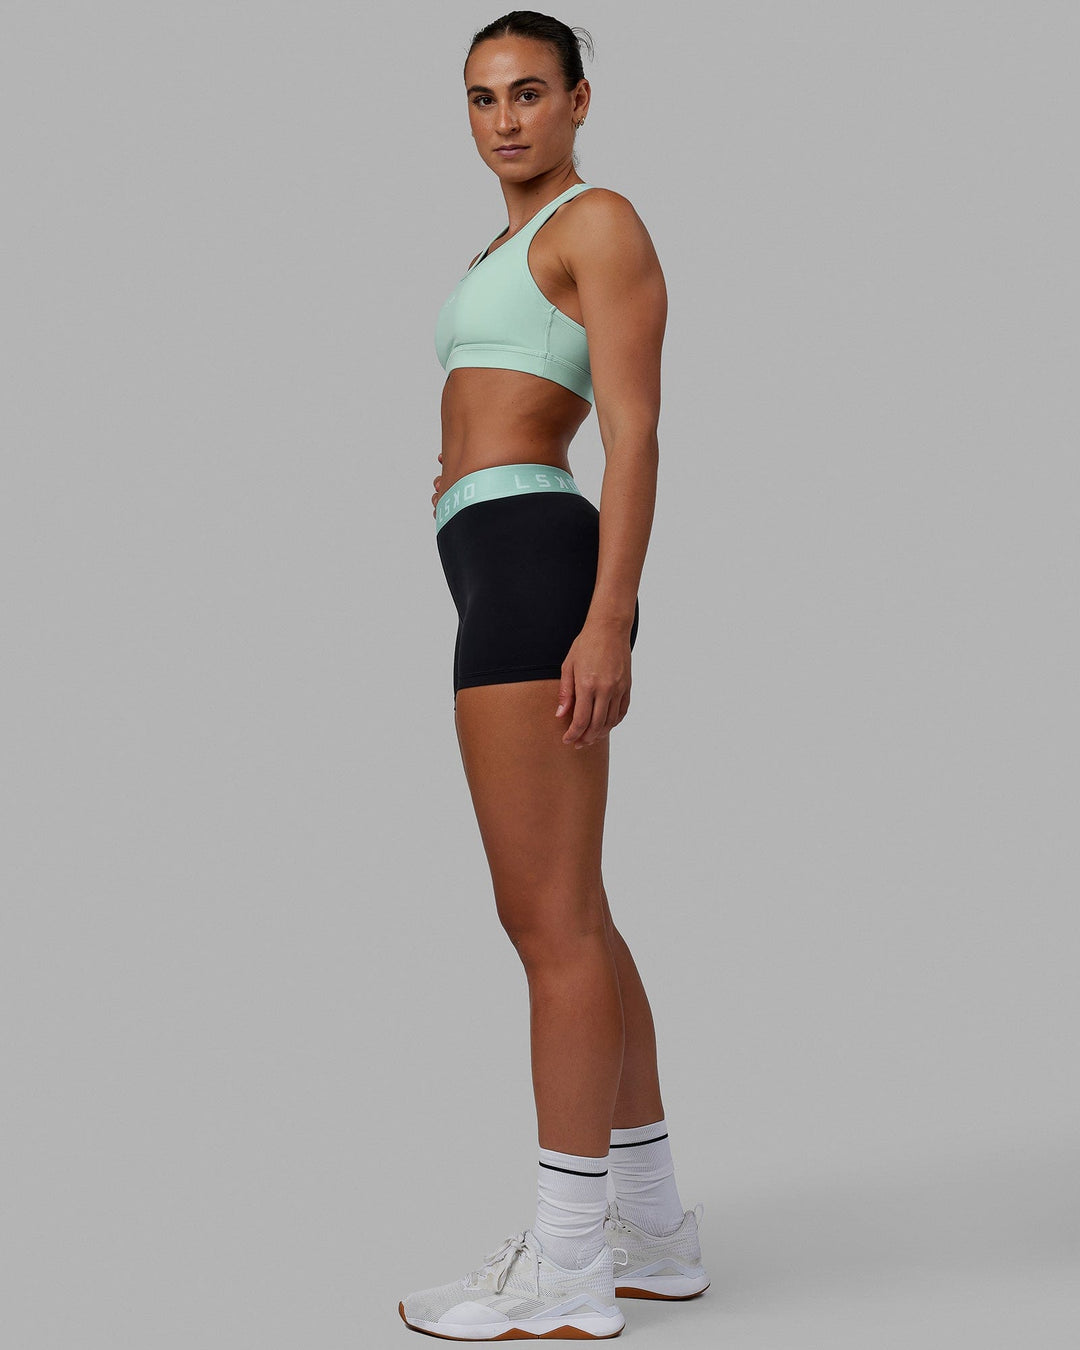 Woman wearing Extend X-Short Tights - Black-Pastel Turquoise